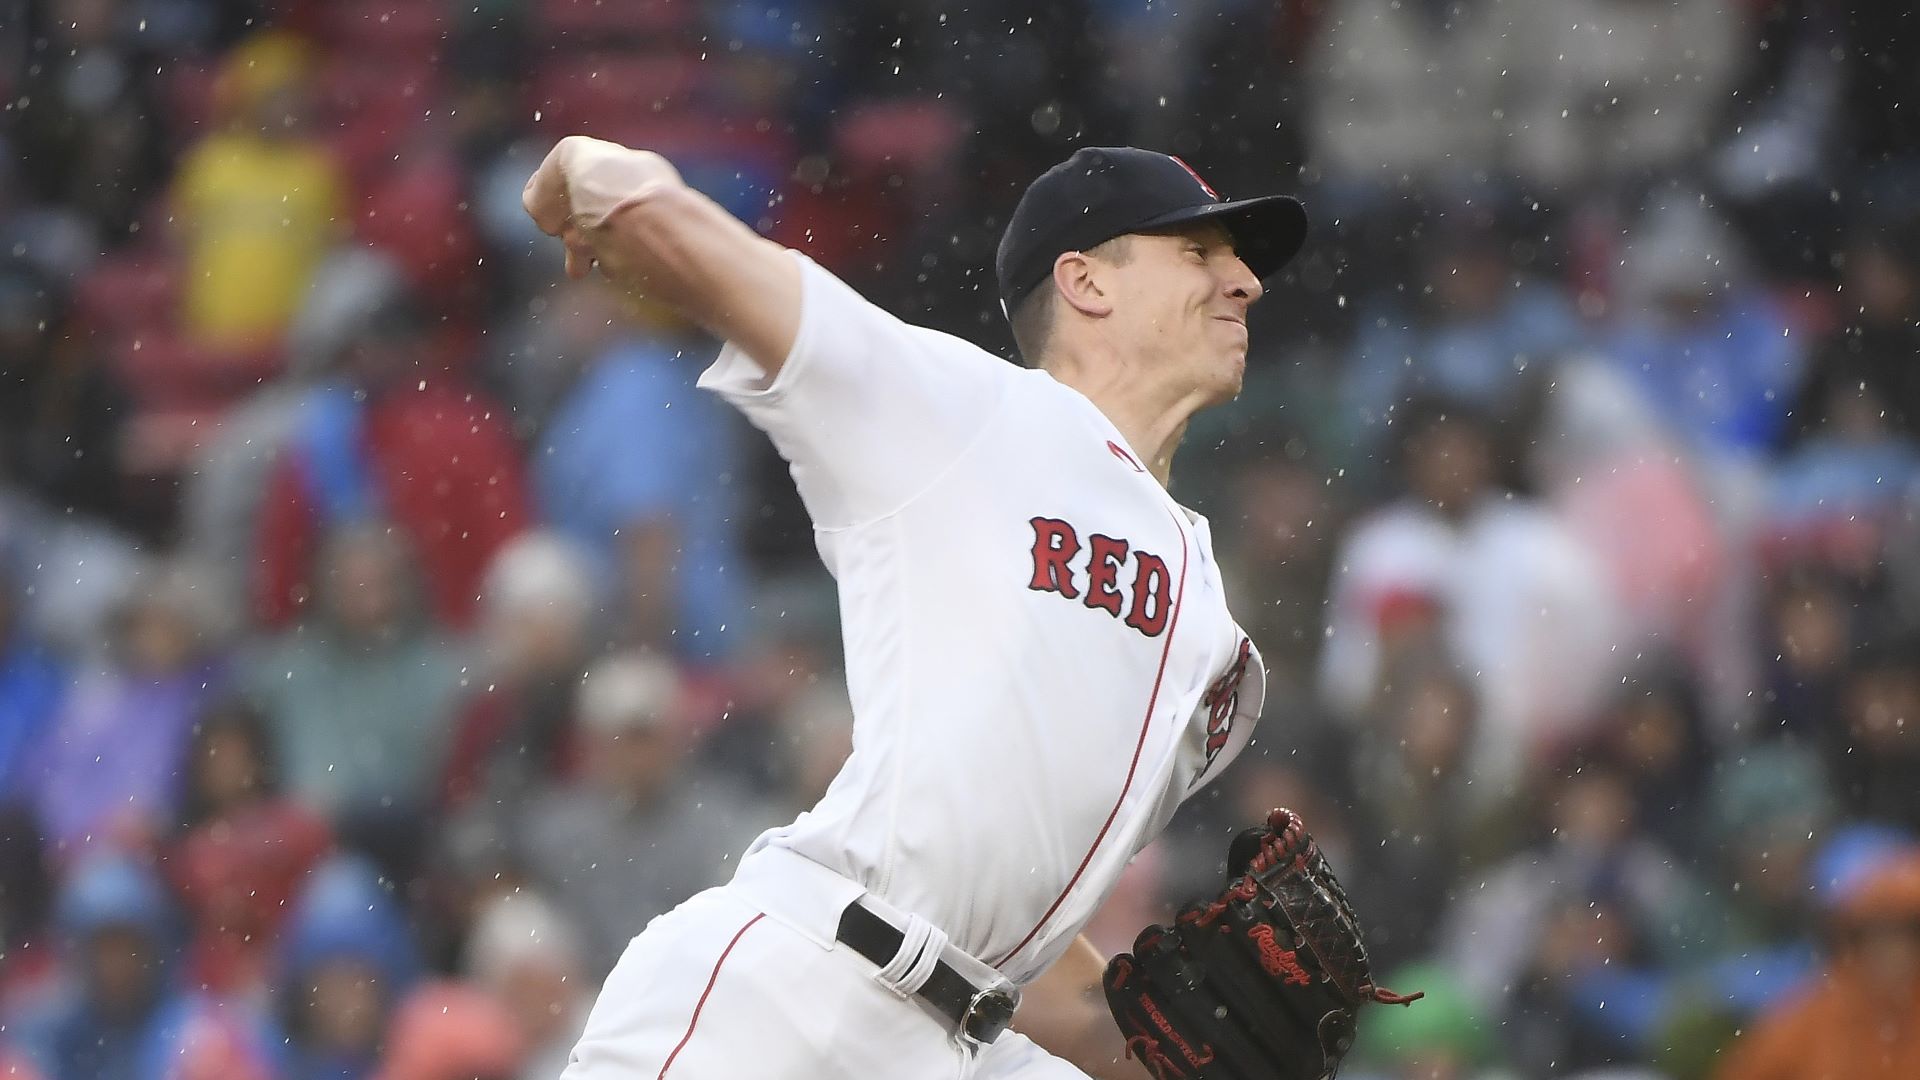 Red Sox Notes: Nick Pivetta's Turnaround Promising For Future